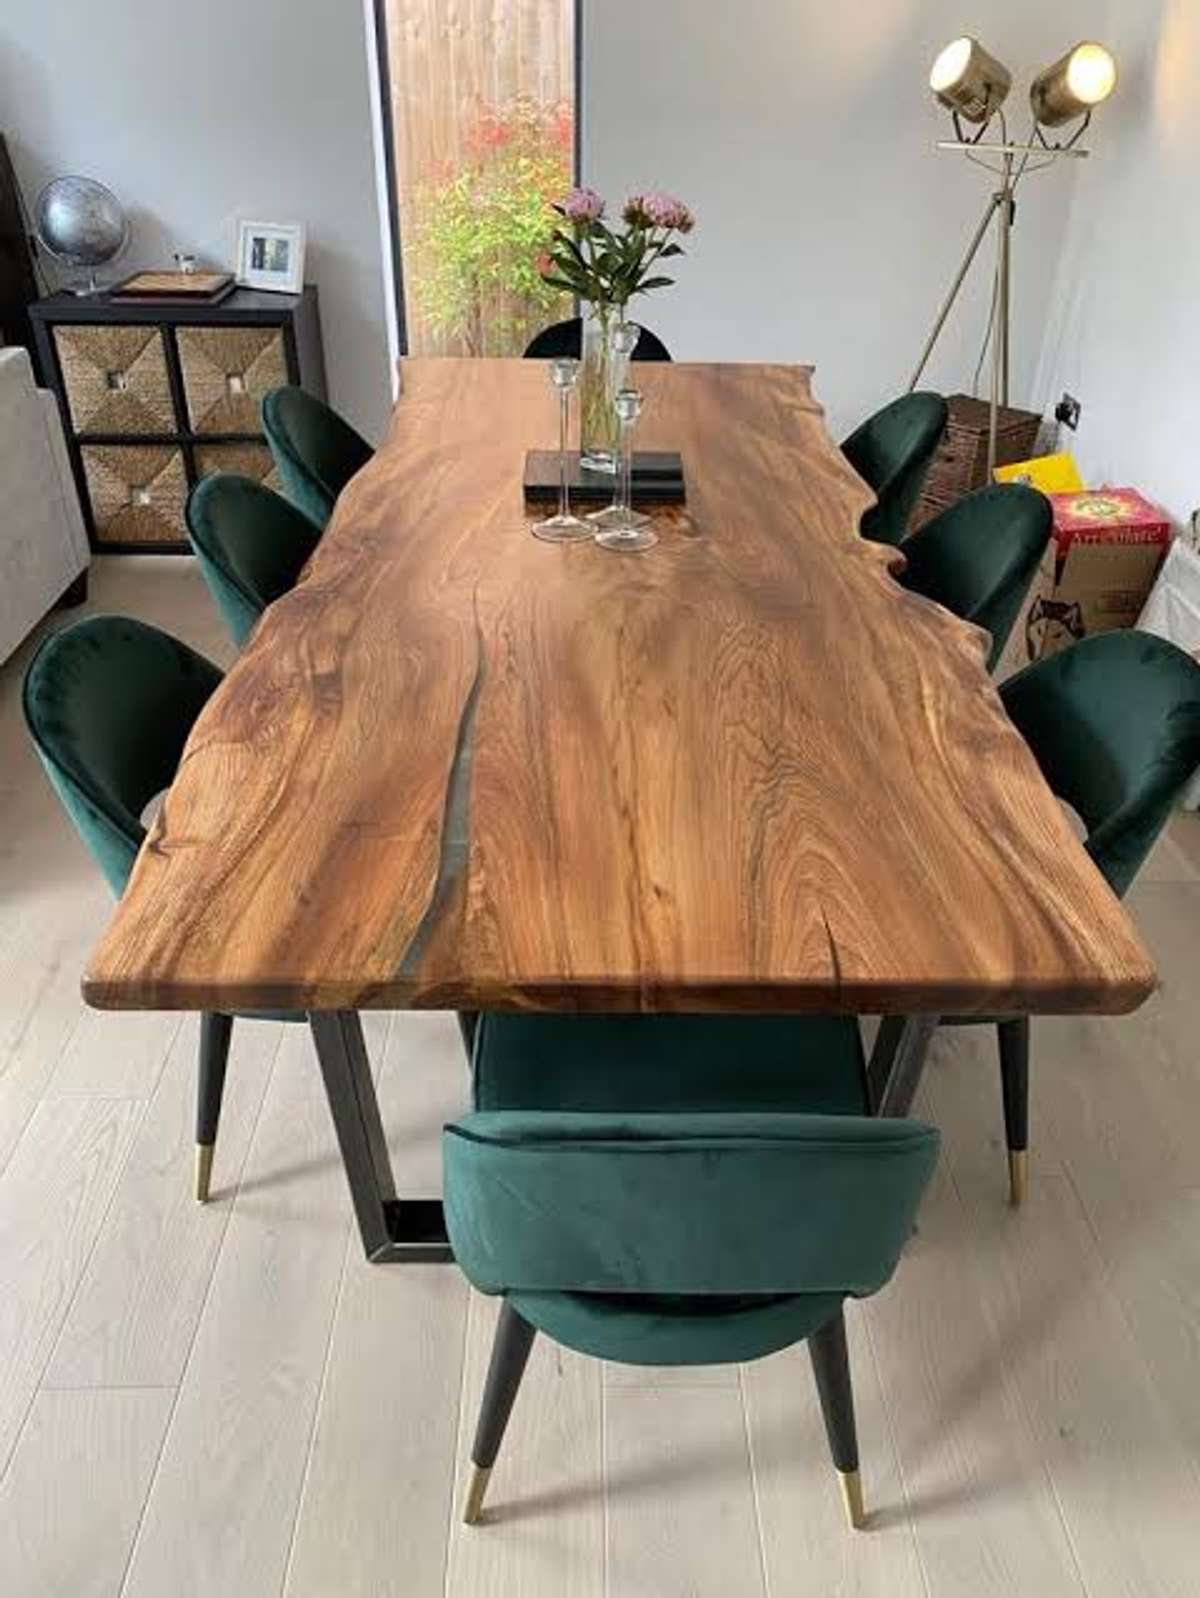 Live Edge Dining Table

49000/-. (gst extra)

contact us for more

9778027292

 #epoxihgalleria #DiningTable #DiningTableAndChairs #DINING_TABLE #RectangularDiningTable #diningarea #diningroomdecor #diningdecor #DiningTableAndChairs 

9778027292


limited period offer

6*3
